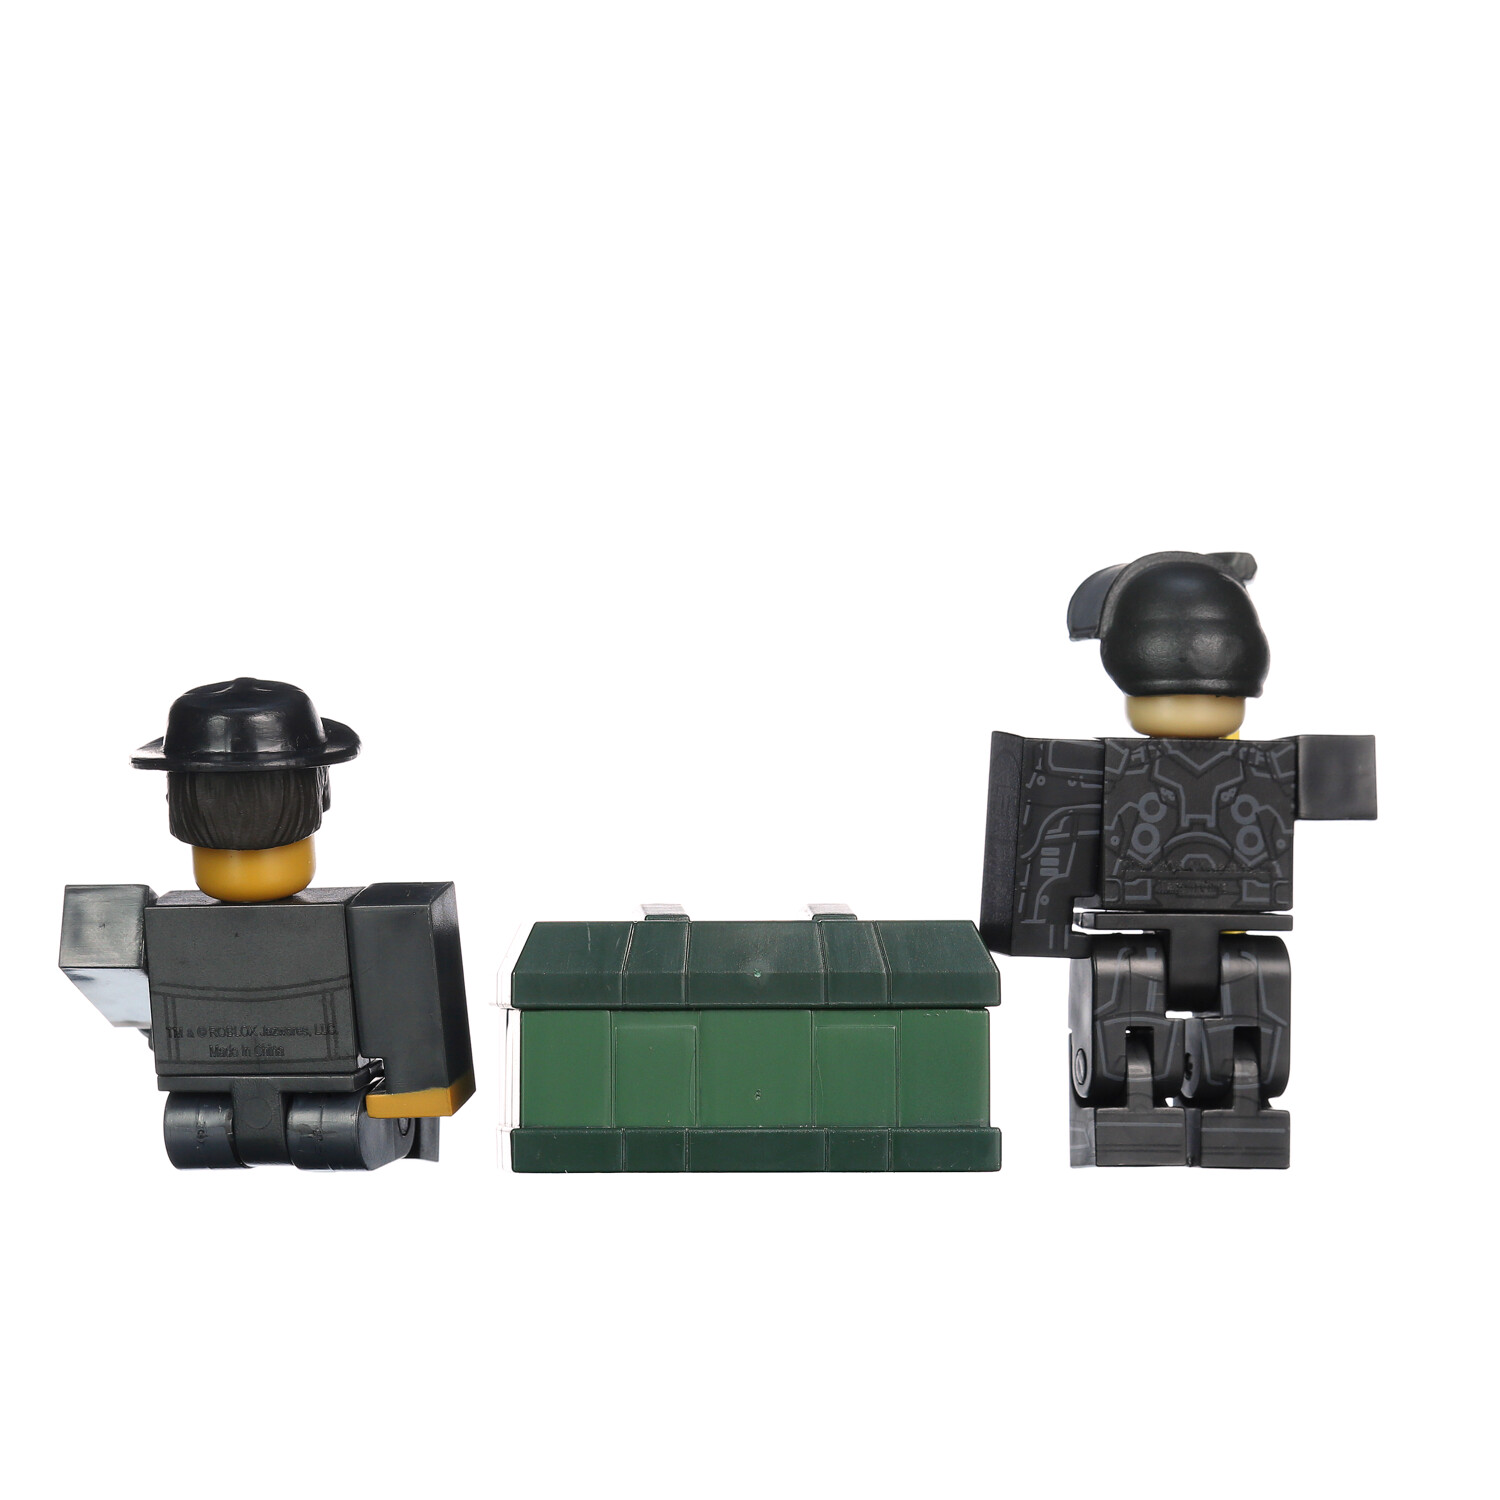 Lego Roblox  Buy lego roblox with free shipping on AliExpress!